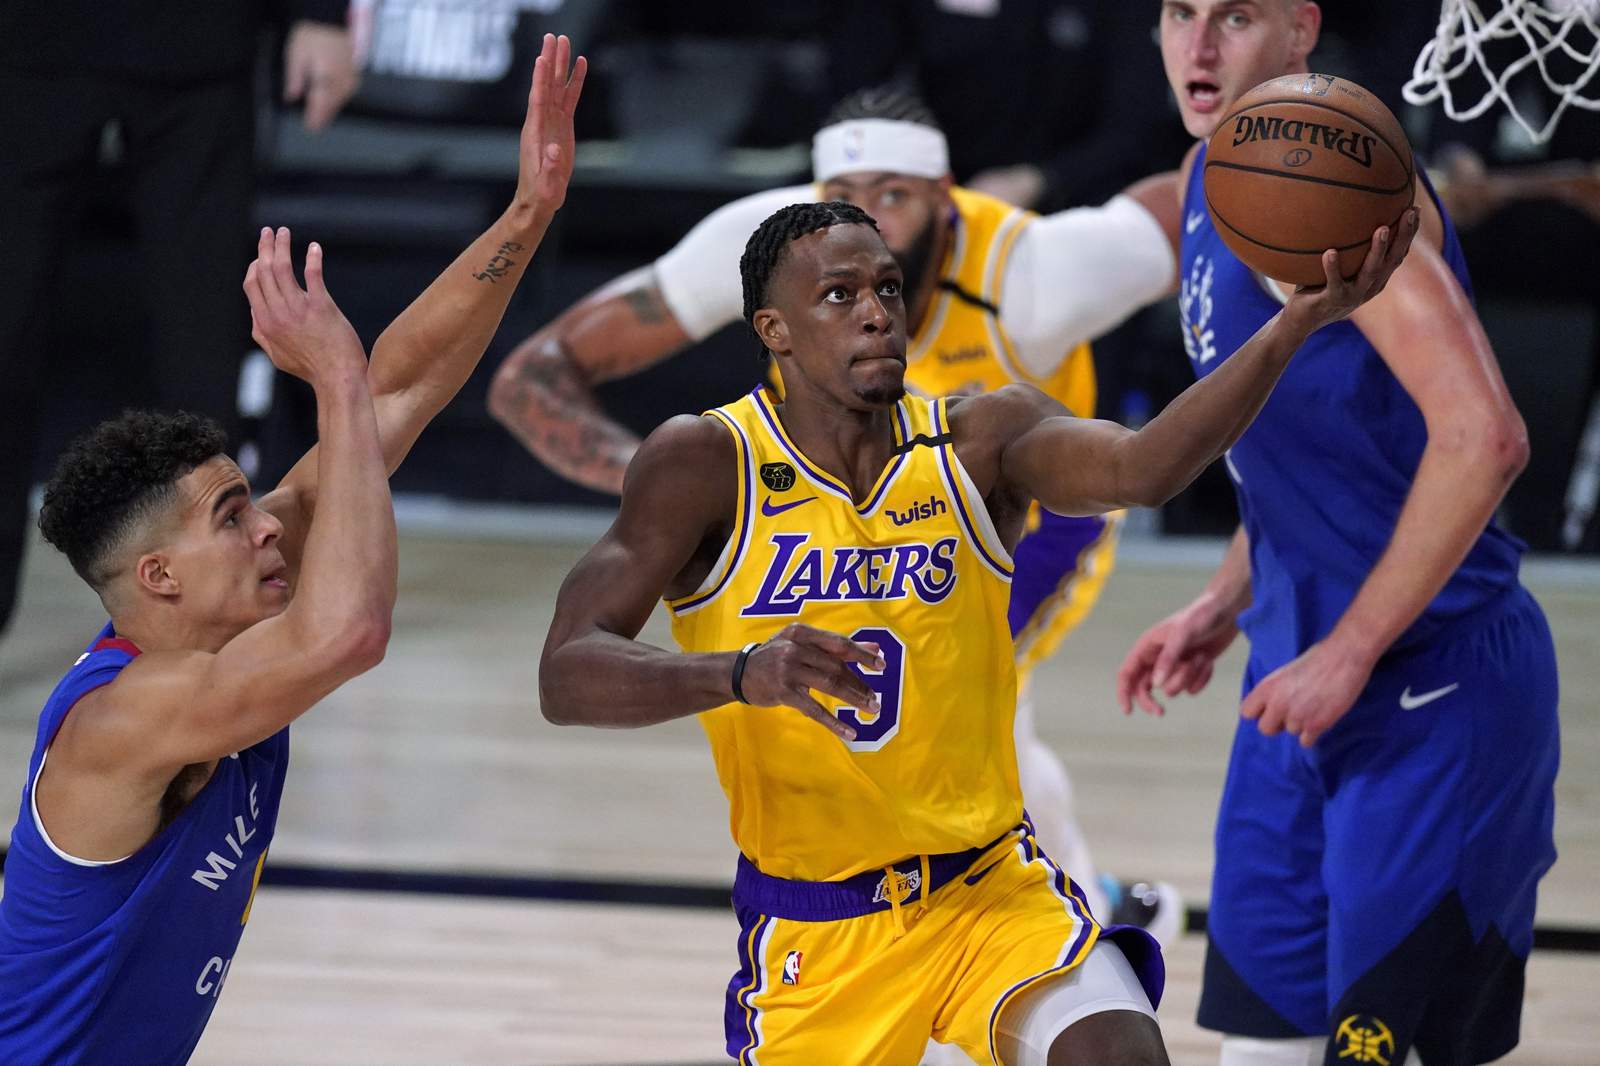 Coaching can wait: Rondo plots future, but stays in present